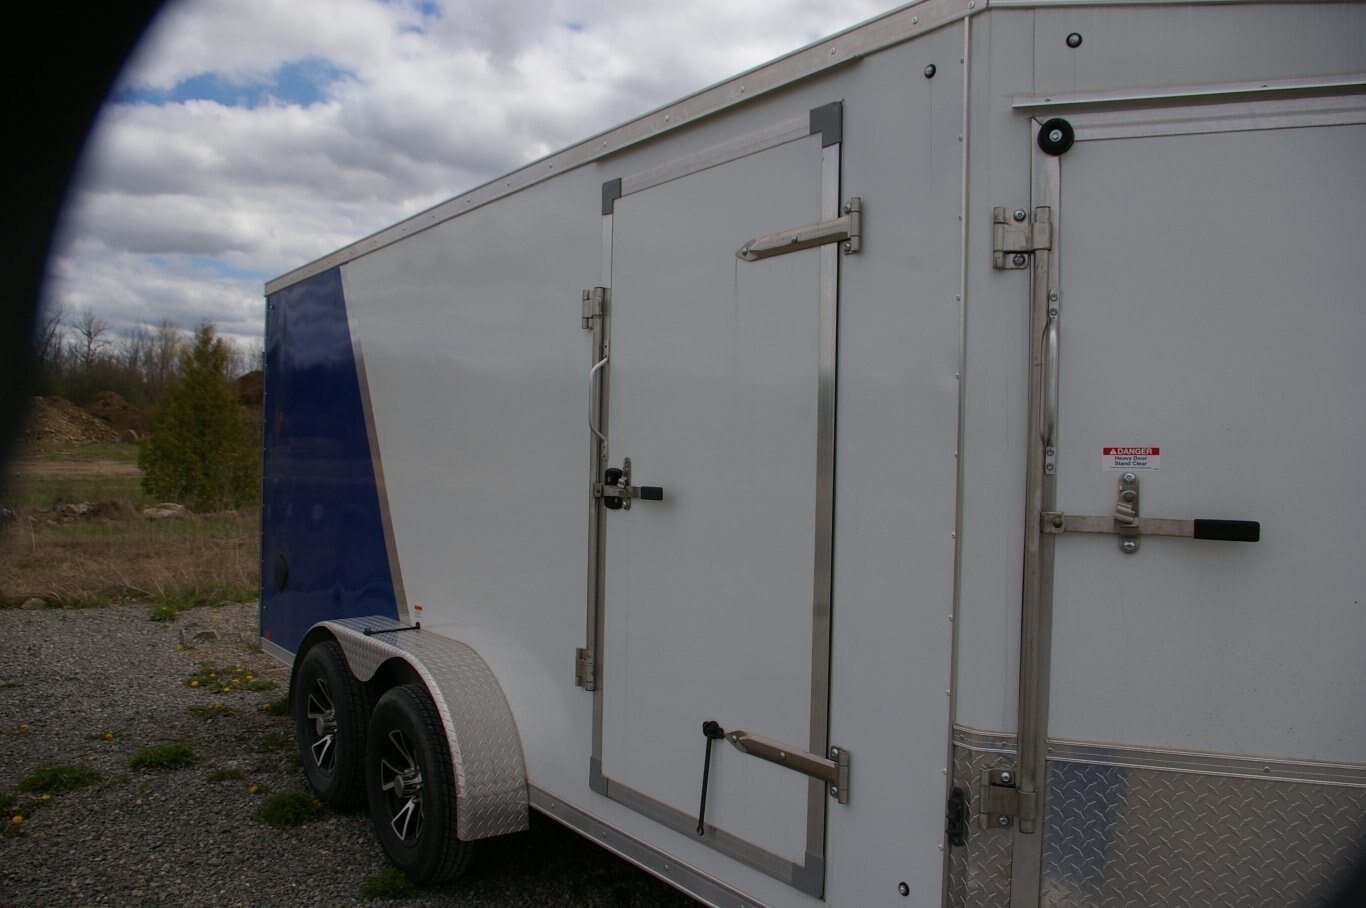 2022 USED 7X21 SNOWMOBILE TRAILER, TANDEM AXLE, 4 Sled Trailer Drive in and Drive Out, WHITE/BLUE, 7000GVWR 